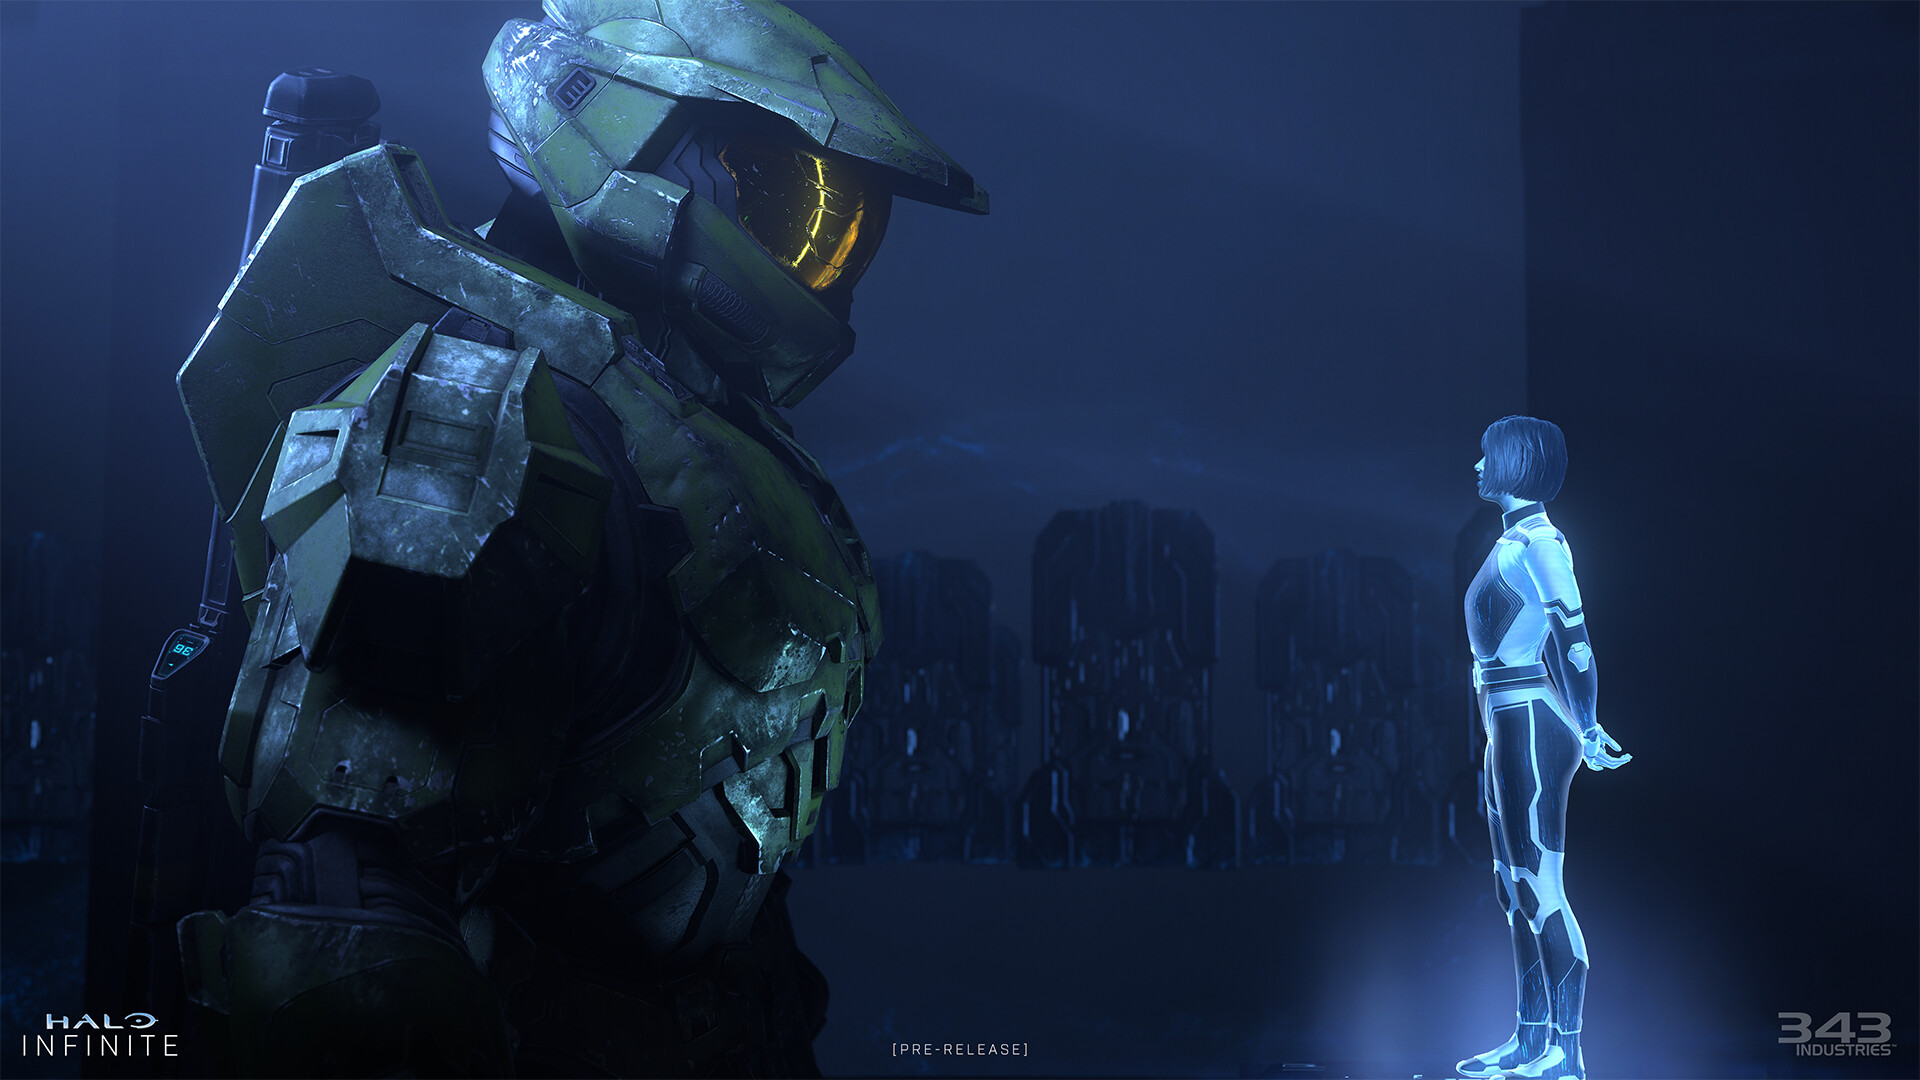 Starting with Season 3, Halo Infinite seasons will be "consistent", 343 Industries assures